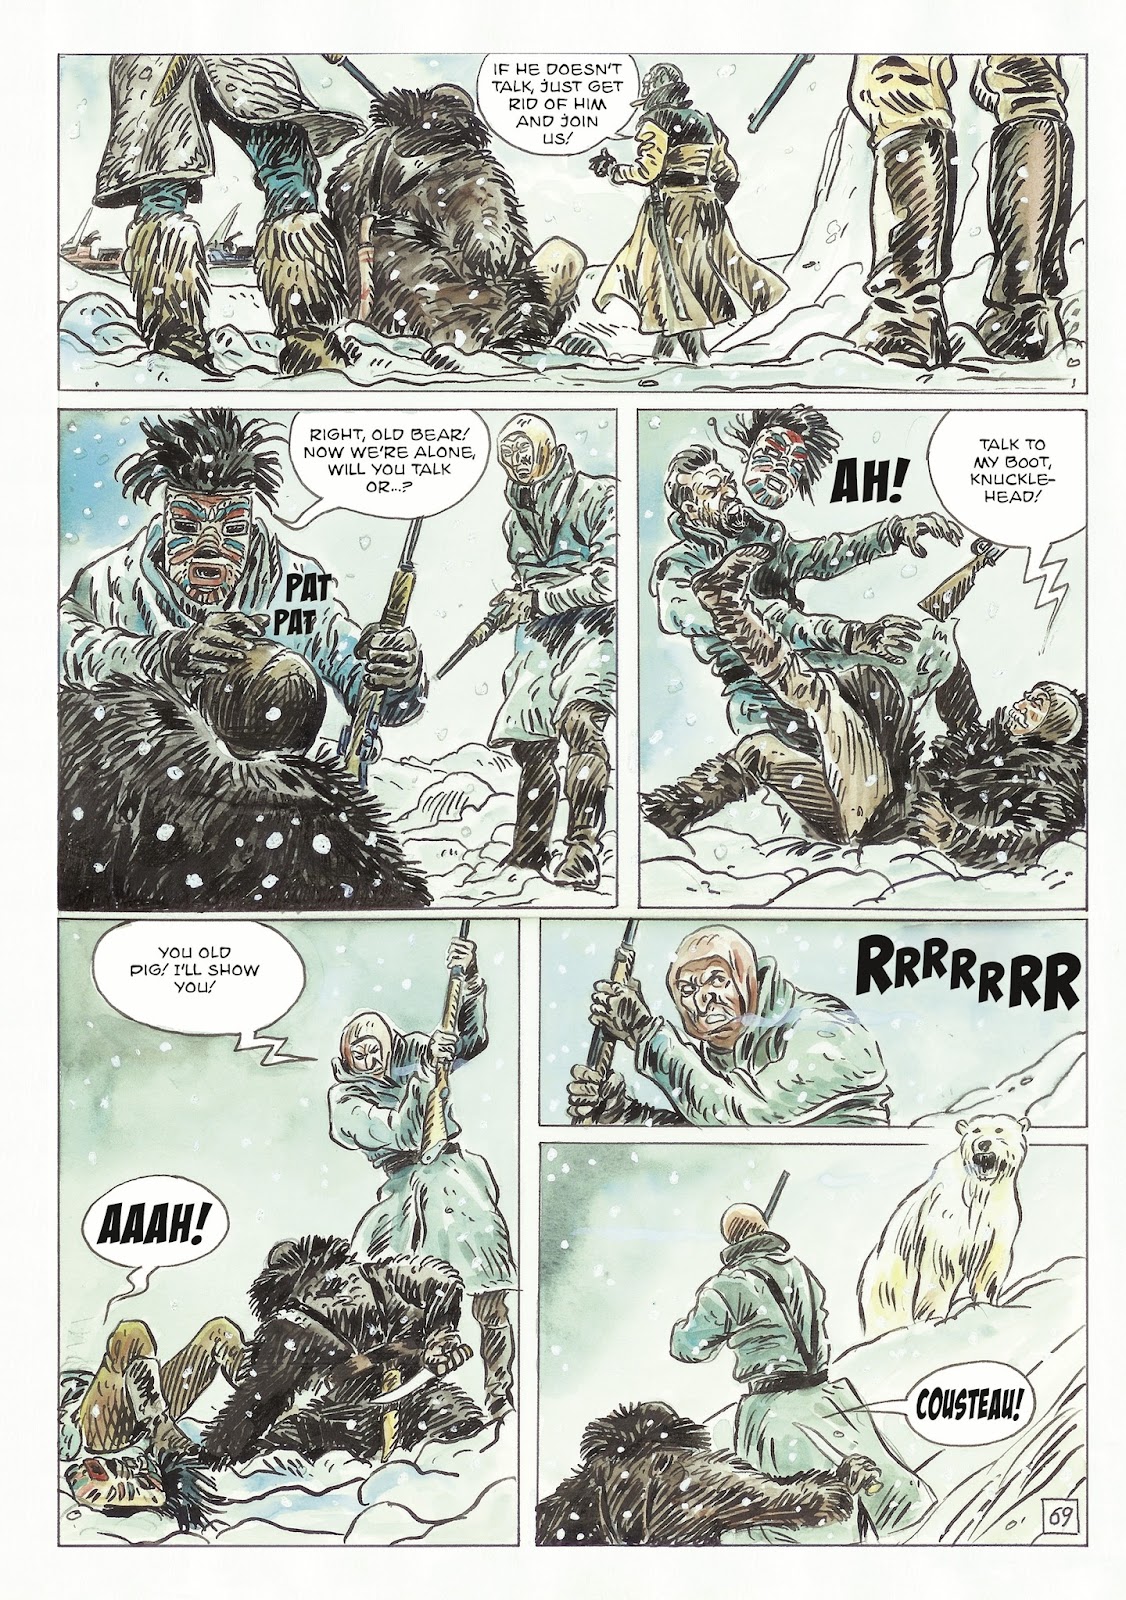 The Man With the Bear issue 2 - Page 15